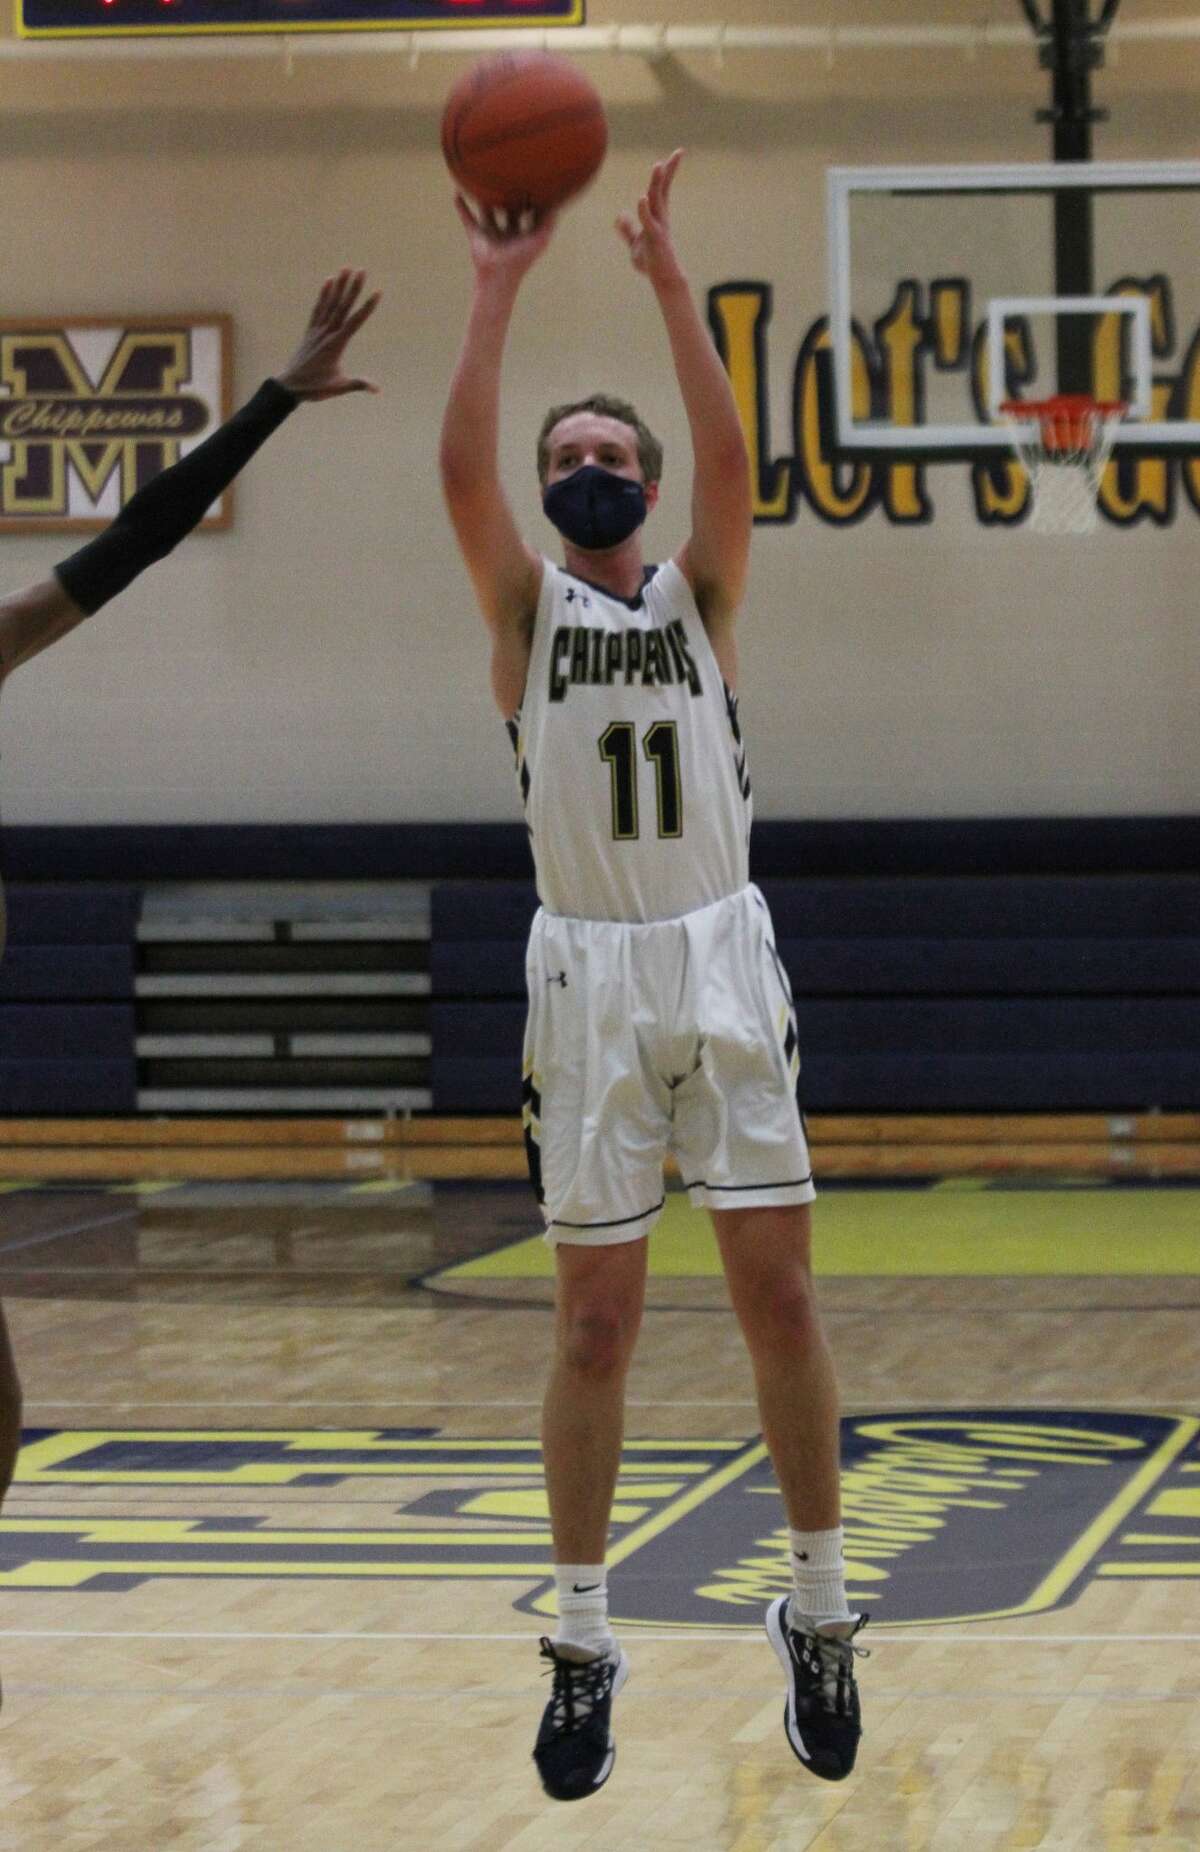 The Manistee boys basketball team fell to Orchard View on Tuesday night.